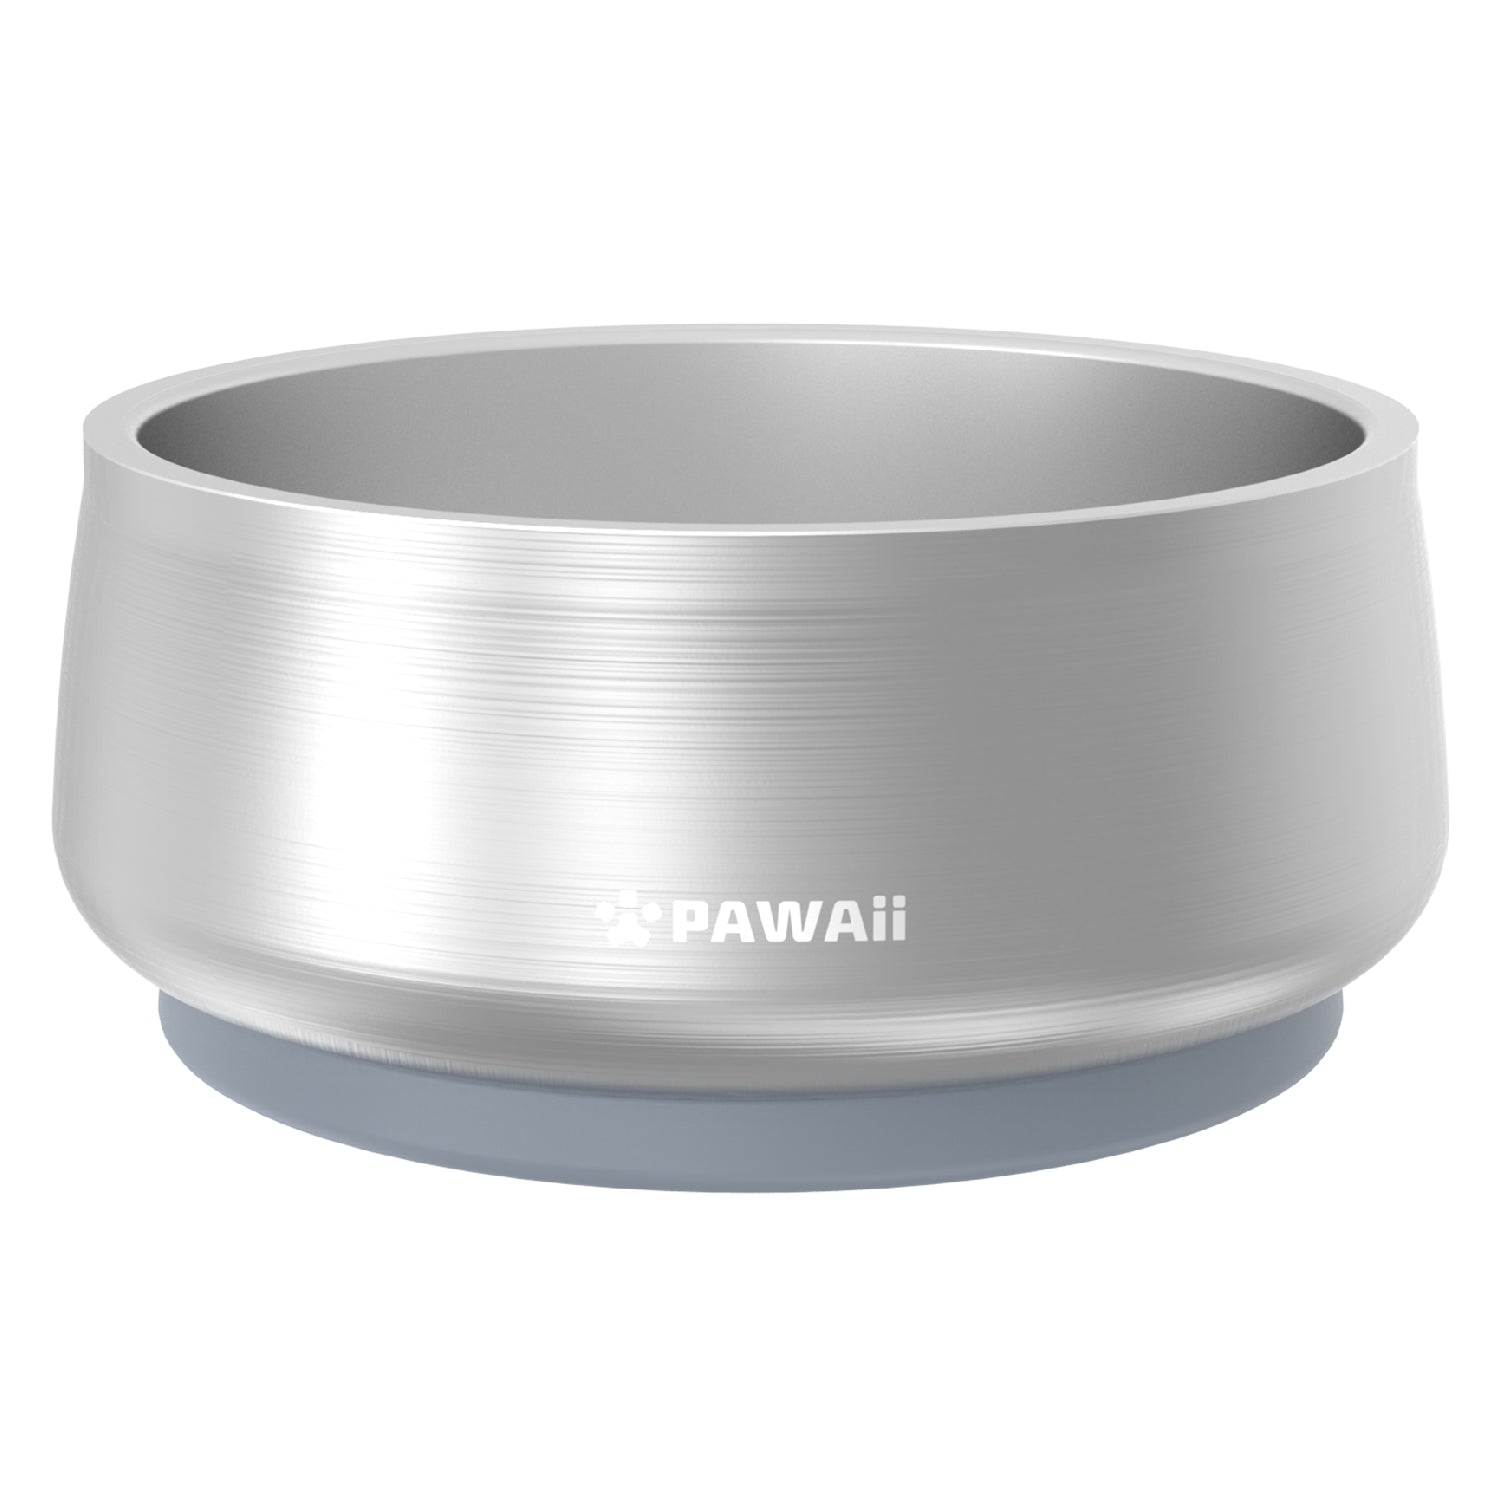 GBowl Stainless-Steel Dog Bowl